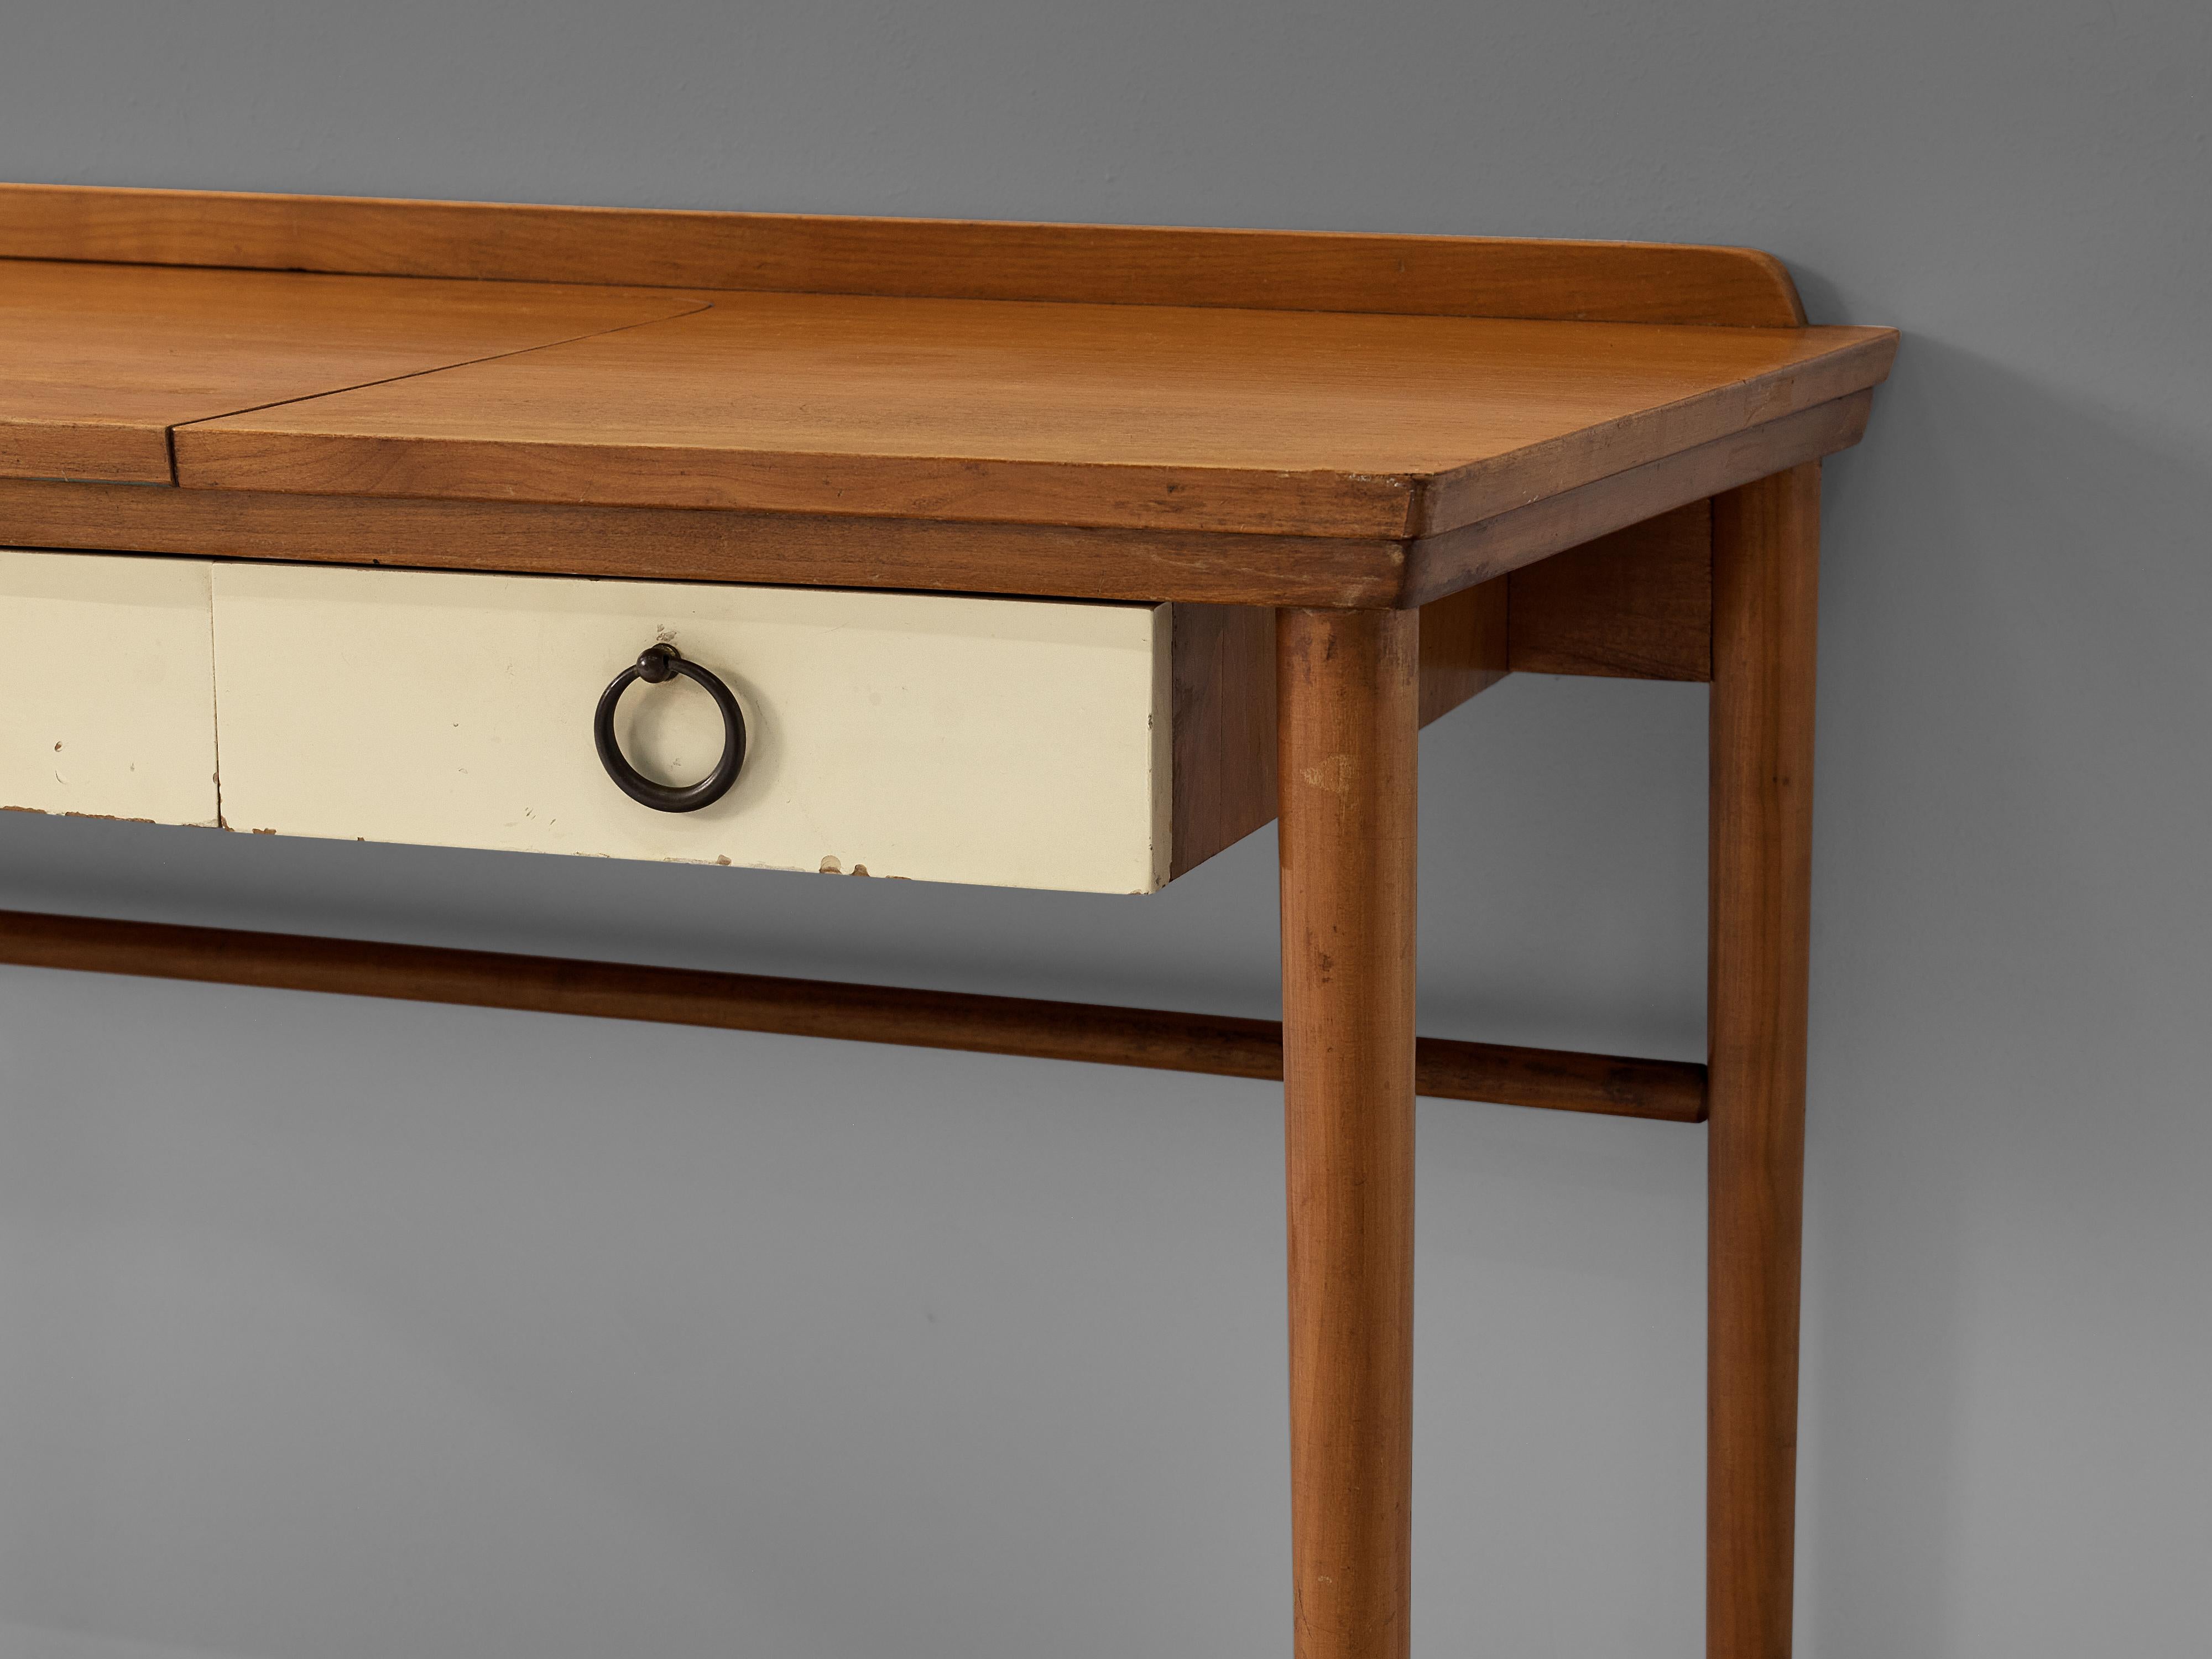 Vanity table, teak, brass, Denmark, 1950s

Nicely designed make-up console of Danish origin. The make up console table is equipped with two drawers in a lighter color in the front that have beautifully brass crafted handles. The top folds open to